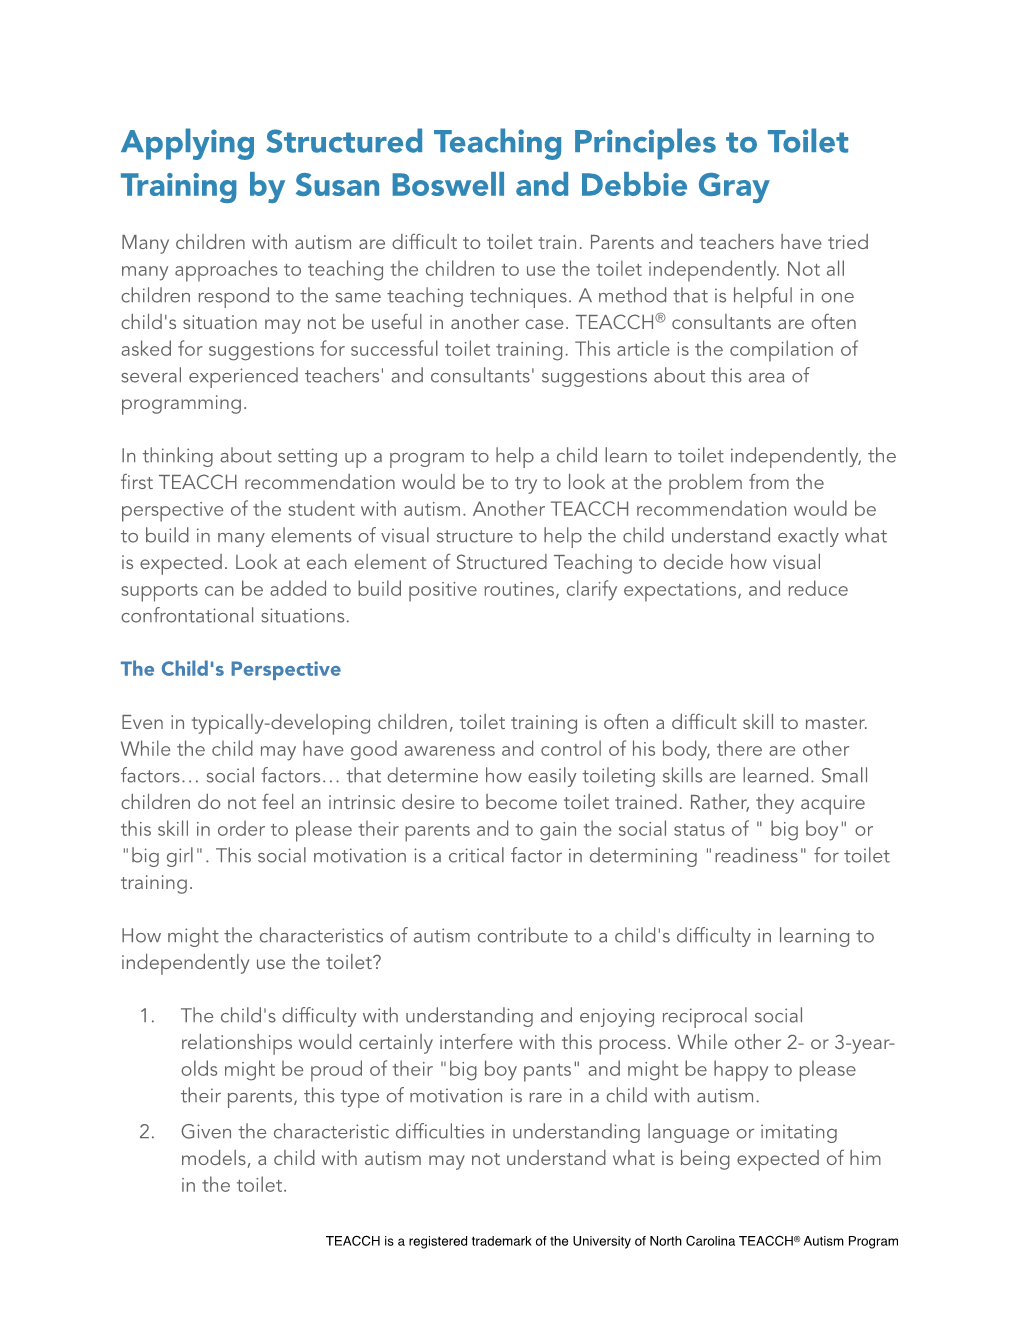 Applying Structured Teaching Principles to Toilet Training by Susan Boswell and Debbie Gray